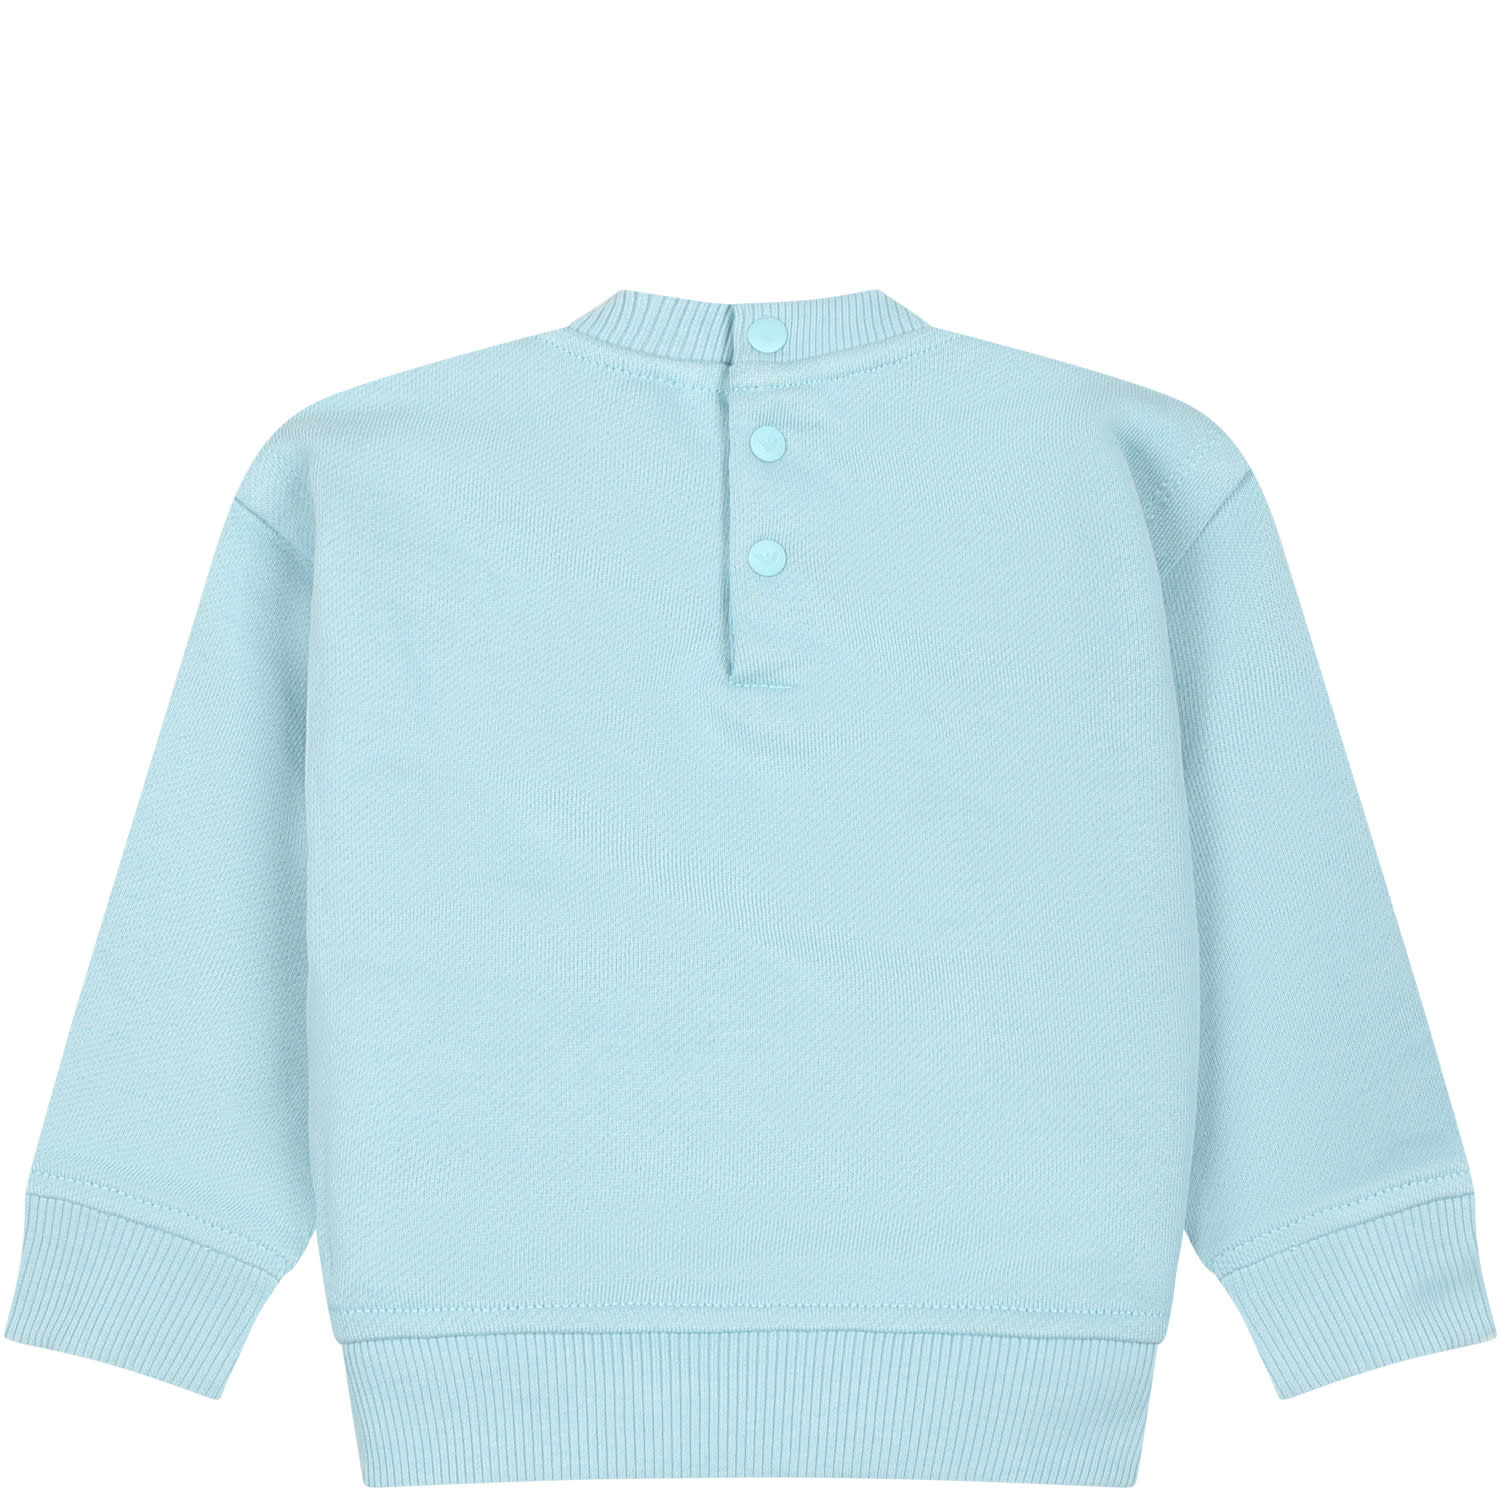 Shop Armani Collezioni Light Blue Sweatshirt For Baby Boy With The Smurfs